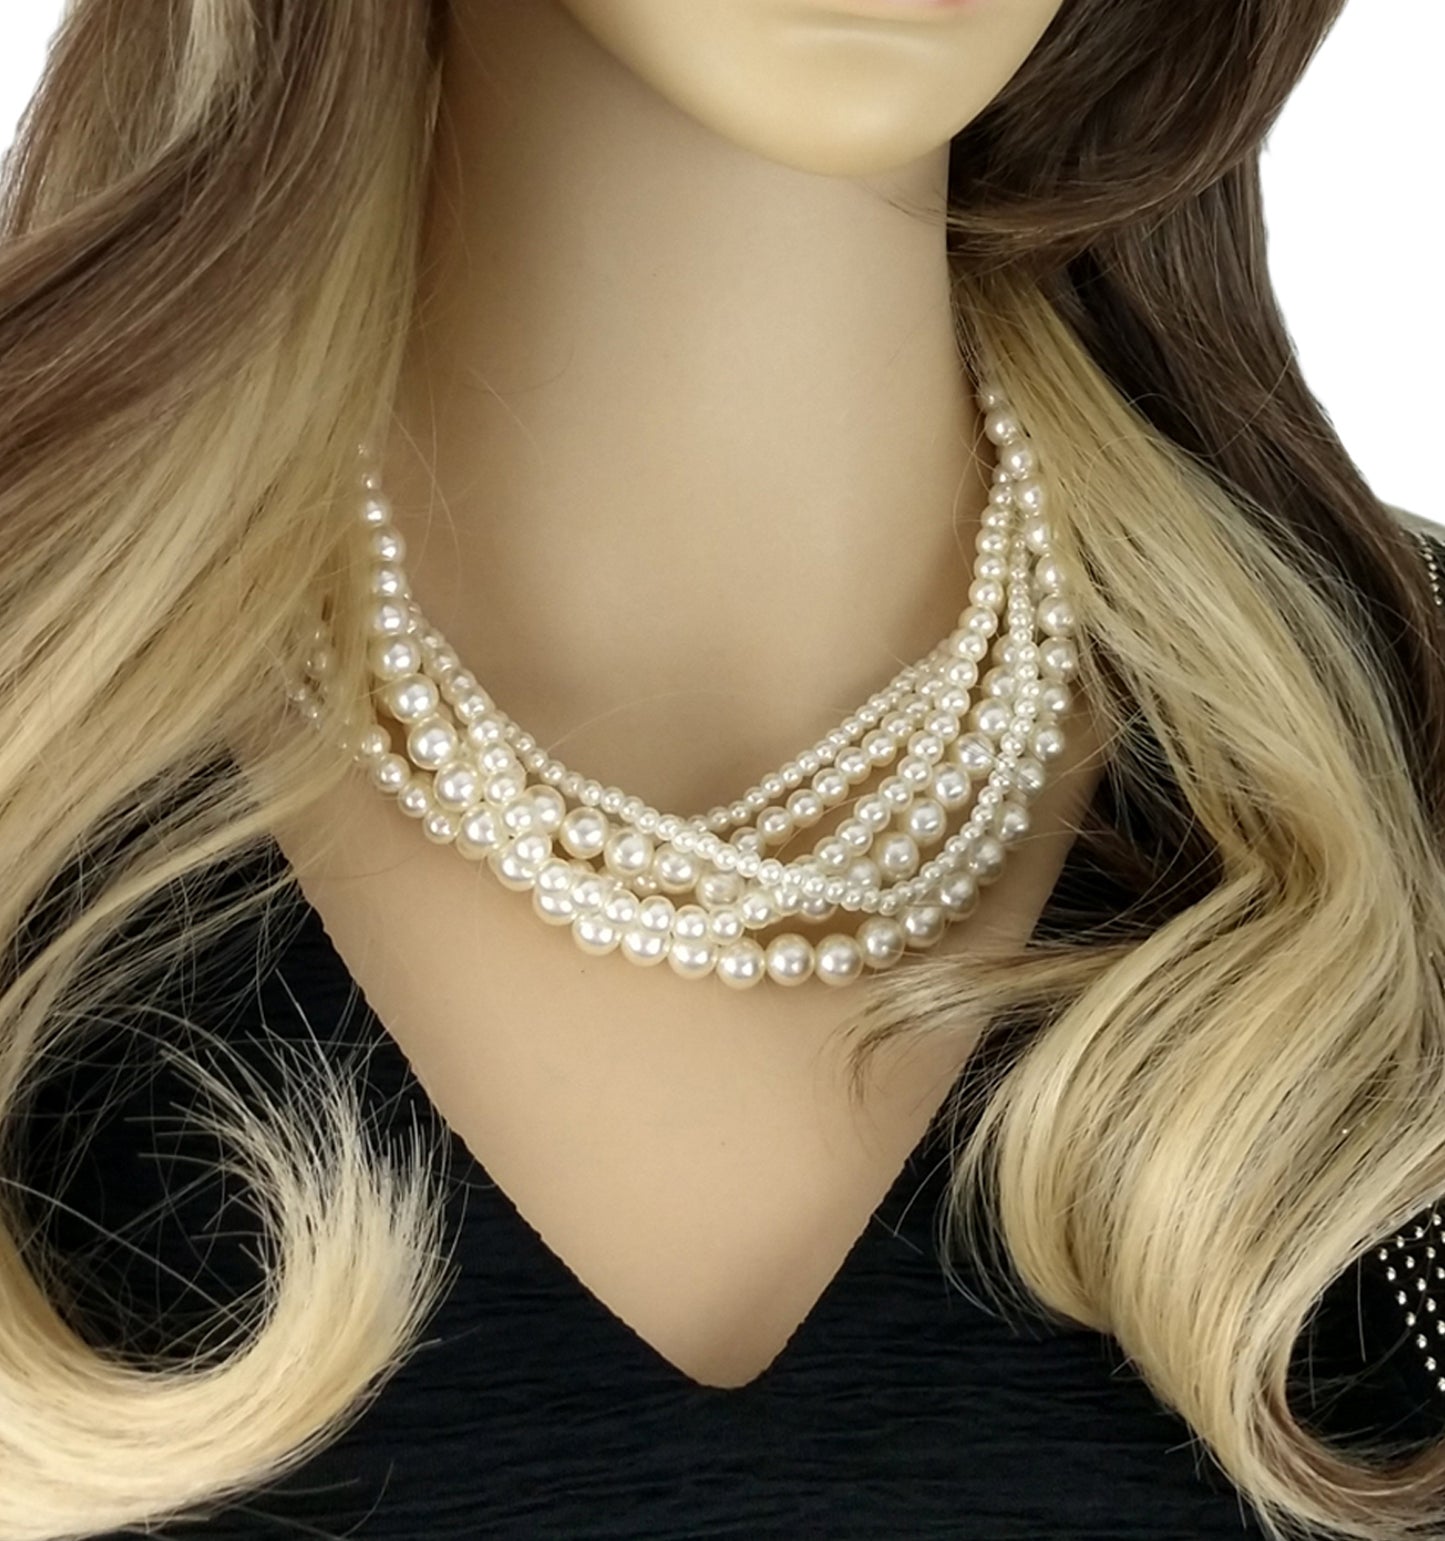 Six Multi Strand Off White Imitation Pearl Collar Necklace For Women 17 1/2"